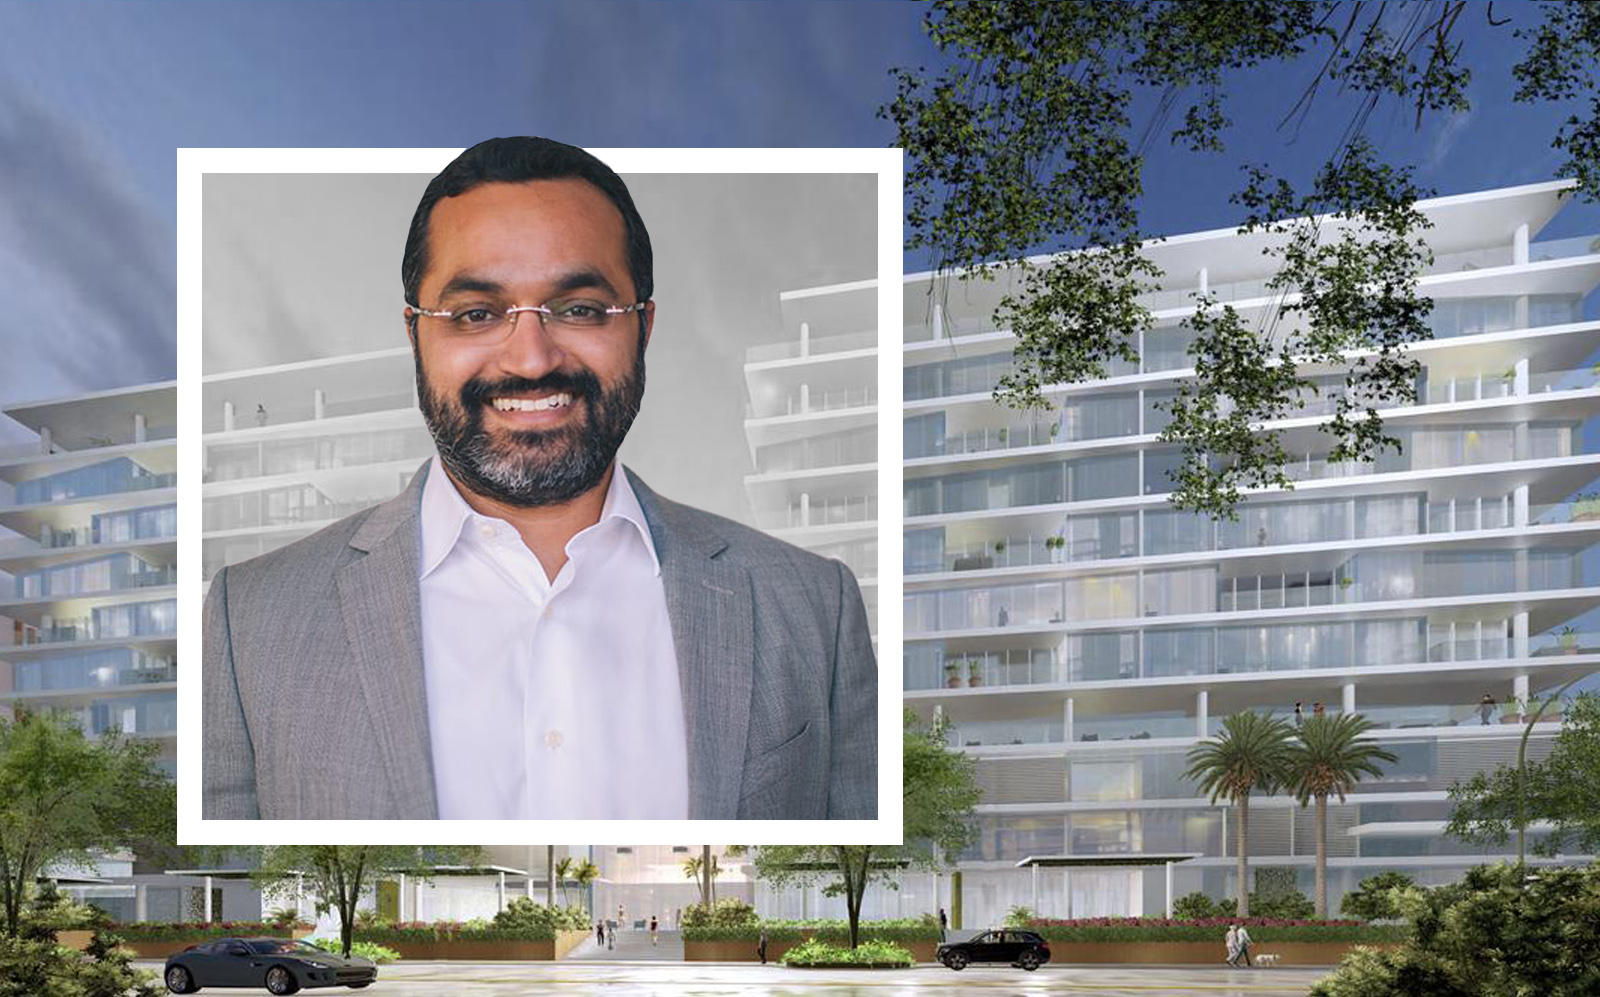 Location Ventures CEO Rishi Kapoor and a rendering of the project. (Location Ventures)